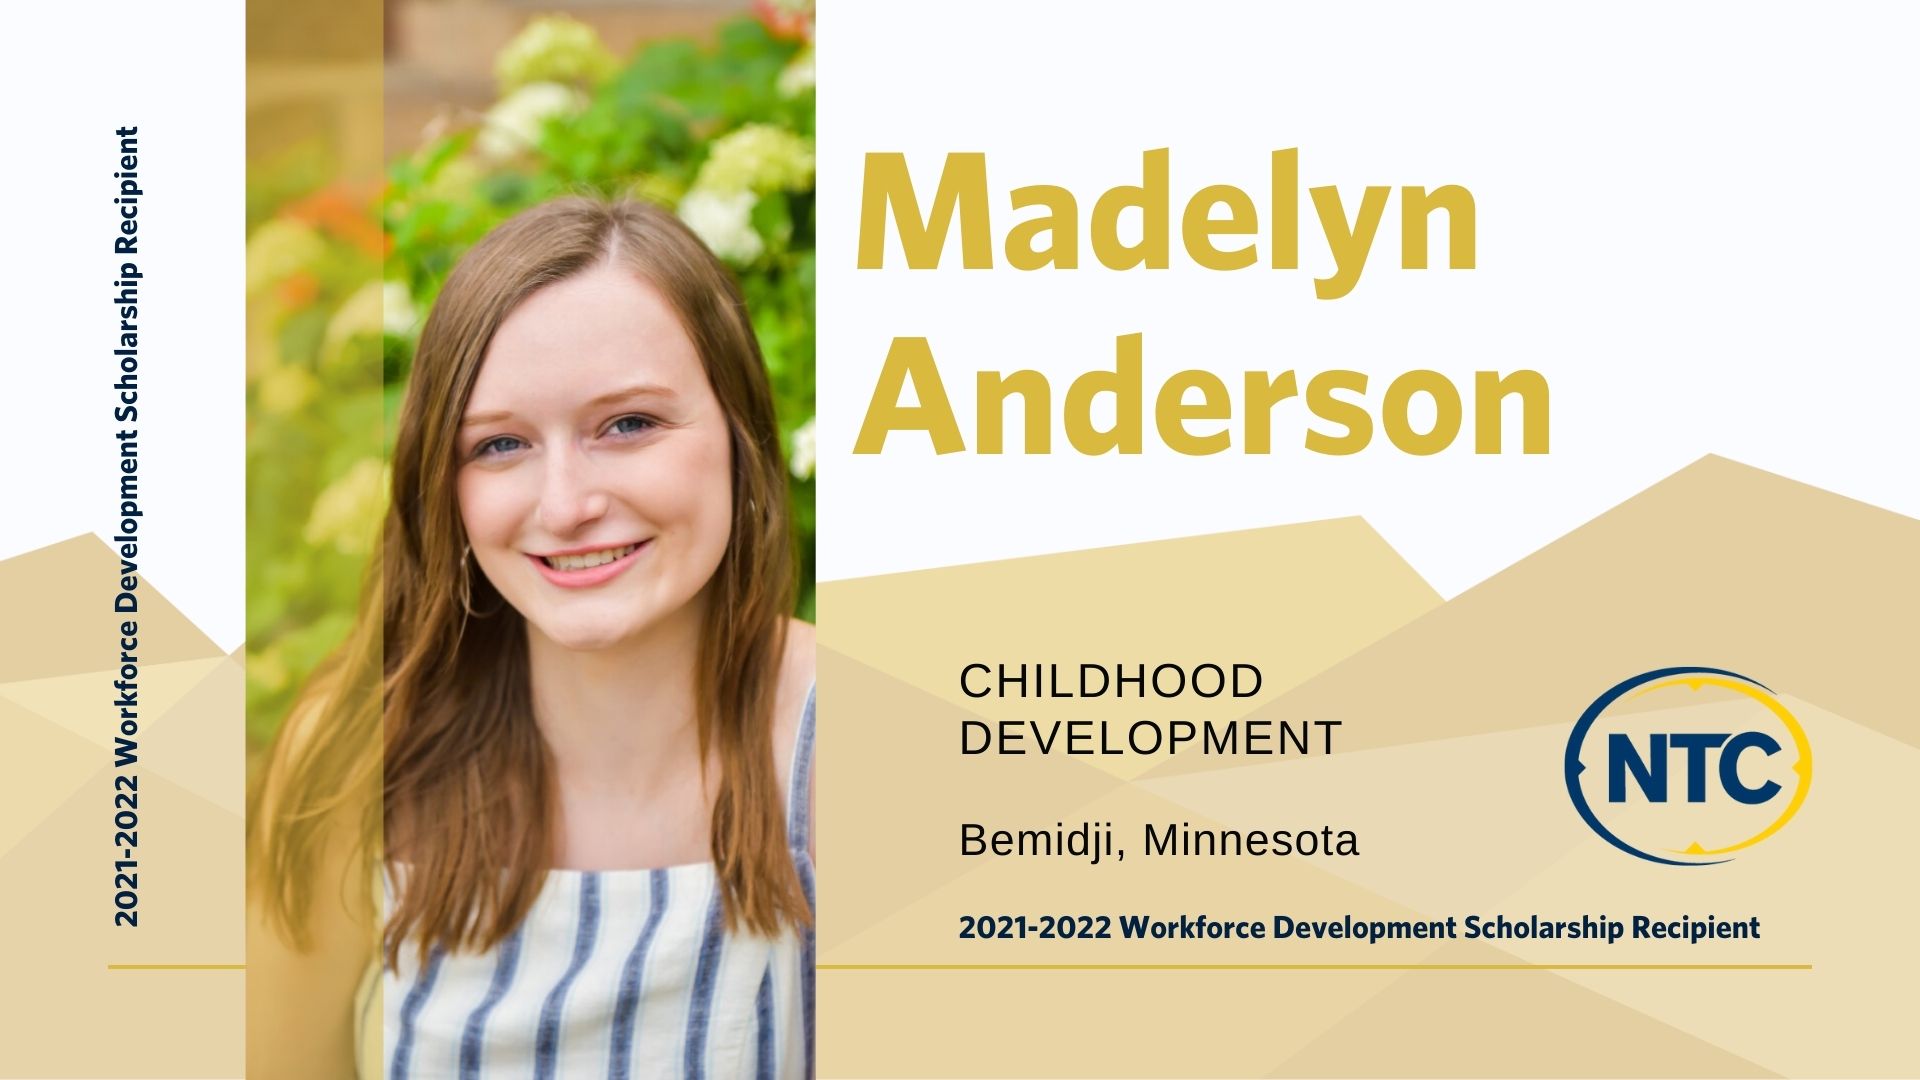 Madelyn Anderson